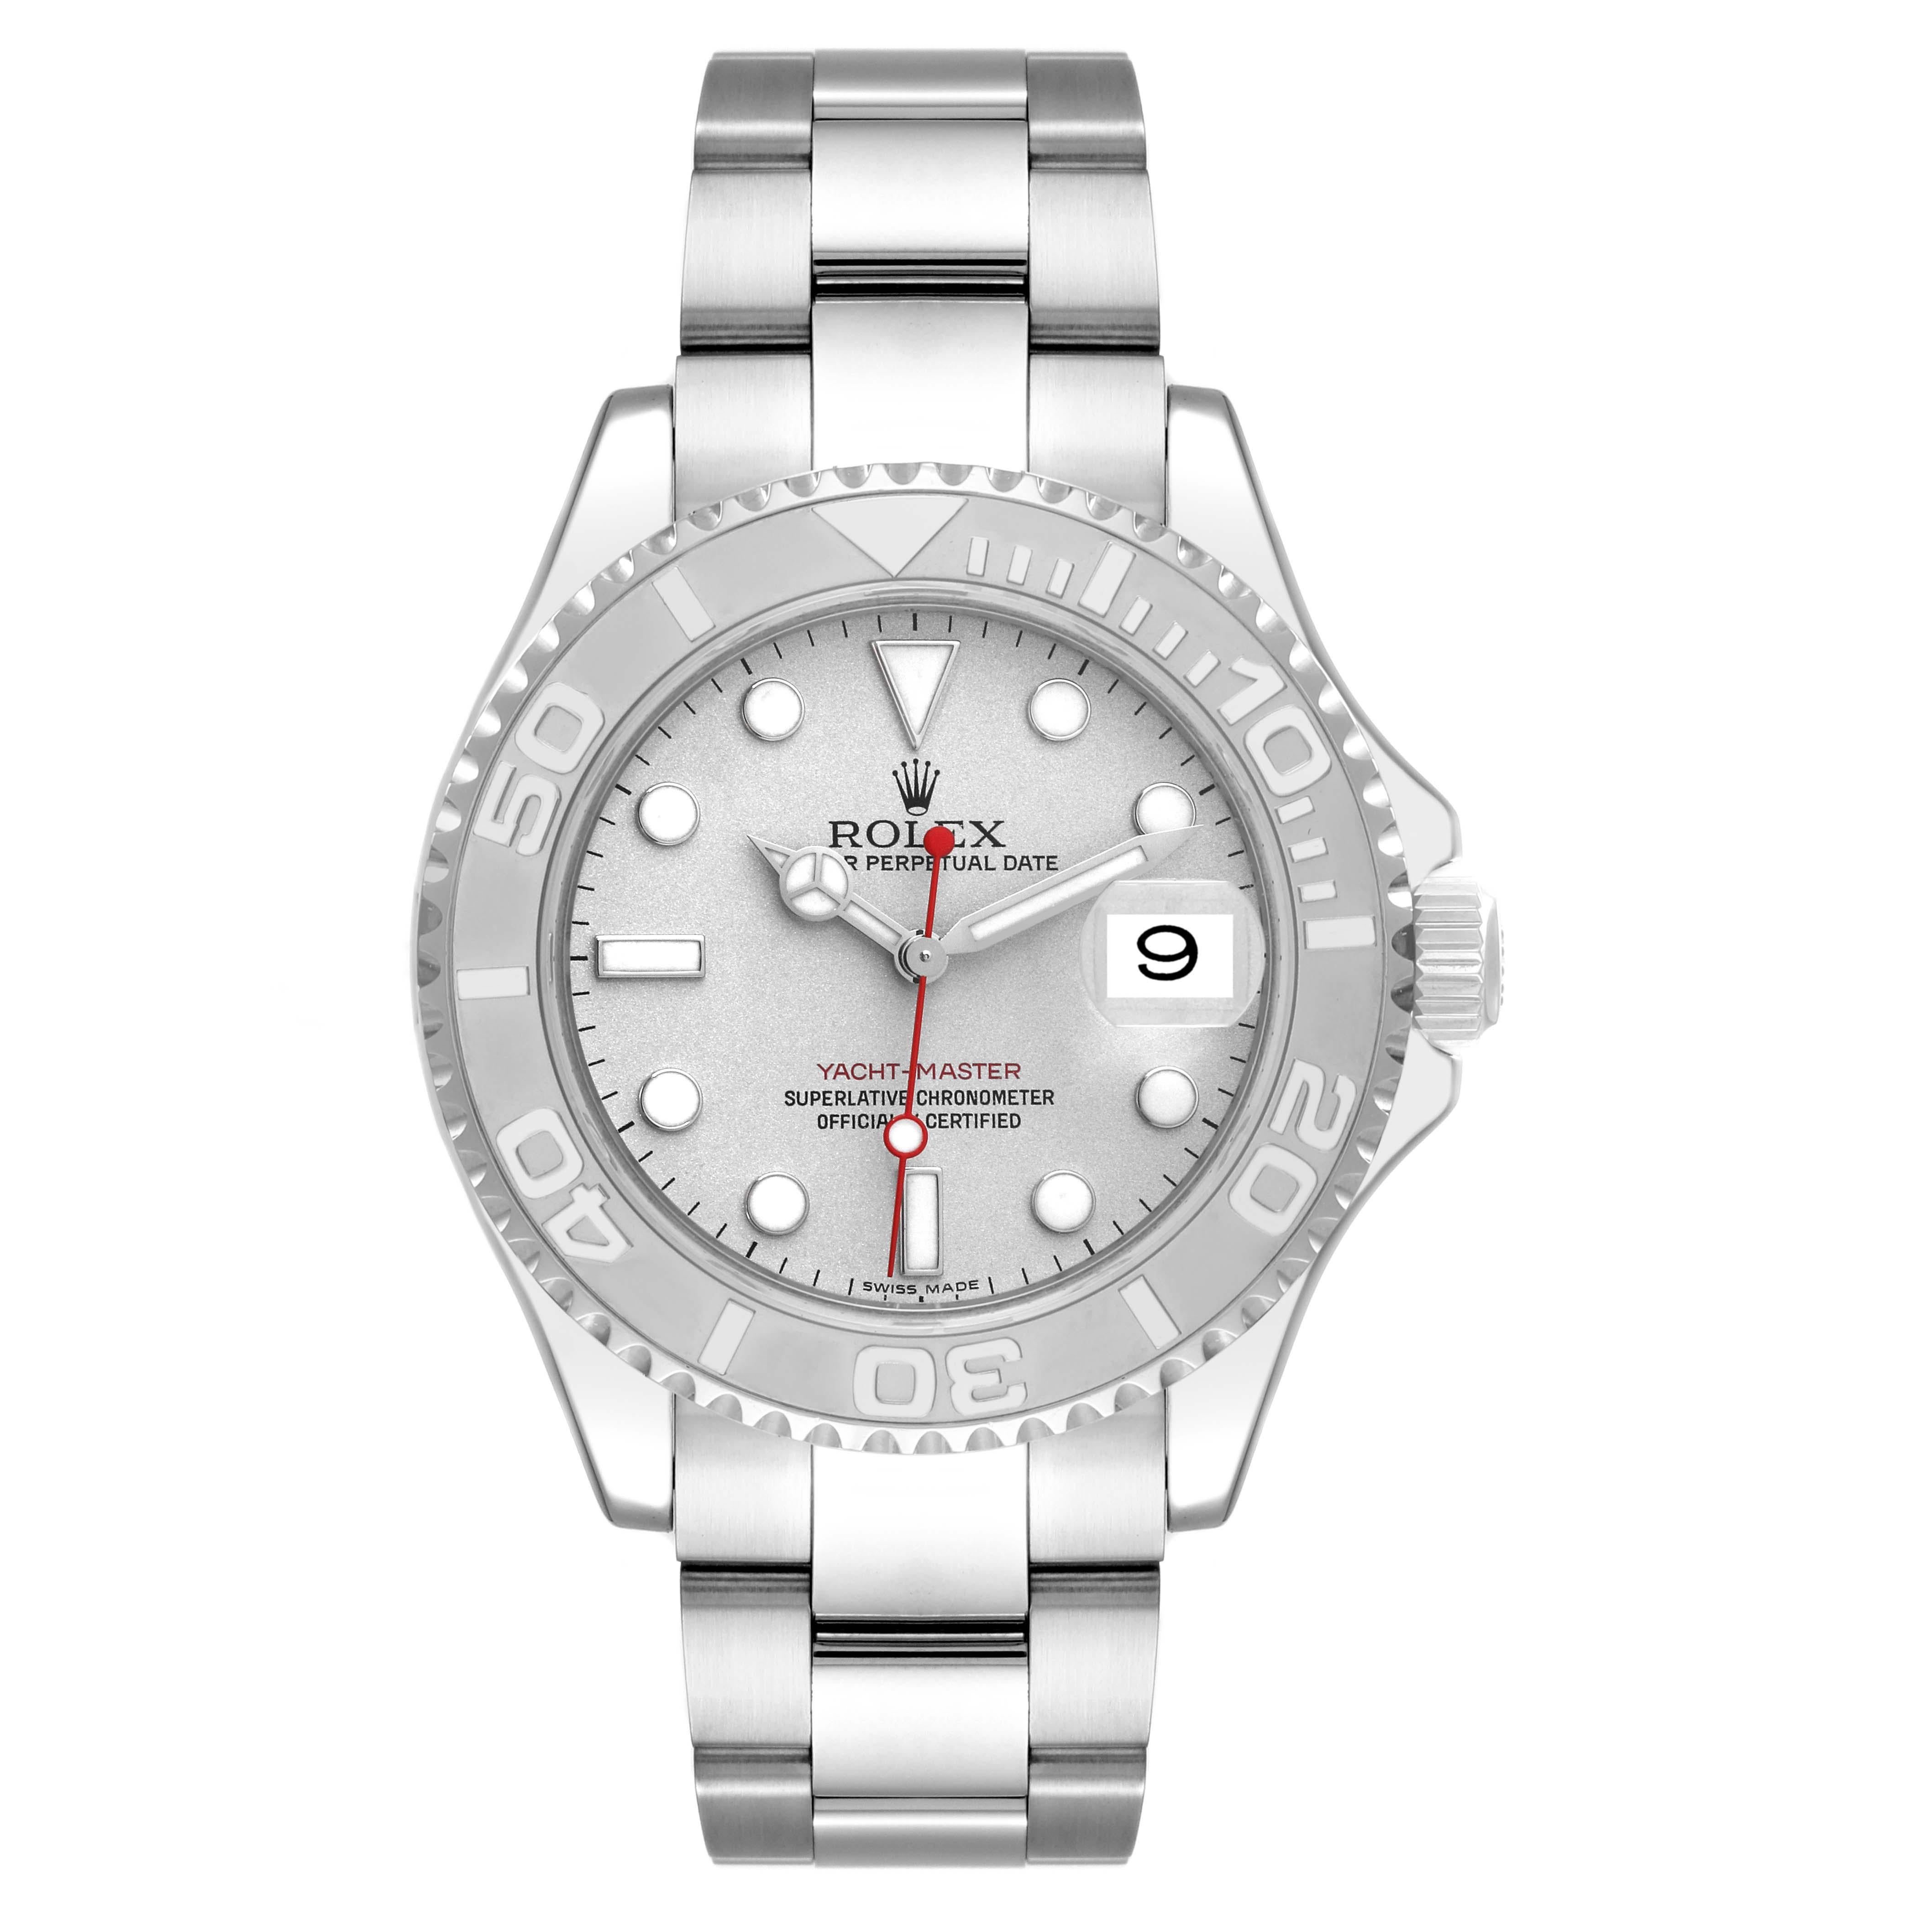 Rolex Yachtmaster Silver Dial Platinum Bezel Steel Mens Watch 16622. Officially certified chronometer automatic self-winding movement. Stainless steel case 40.0 mm in diameter. Rolex logo on the crown. Platinum special time-lapse bidirectional